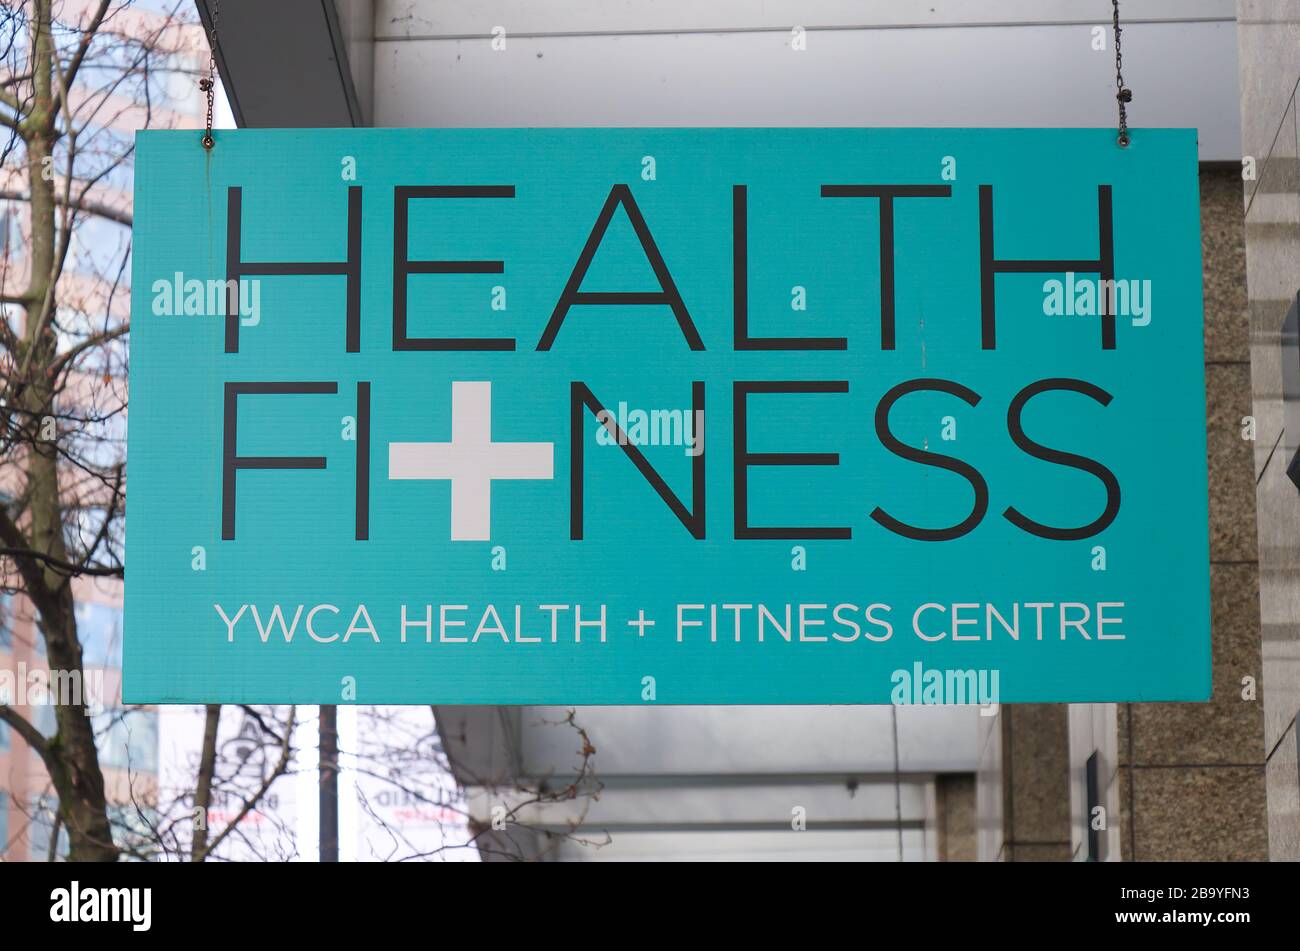 Vancouver, Canada - February 29, 2020: View of blue sign 'YWCA Health + Fitness Centre' in Downtown Vancouver Stock Photo